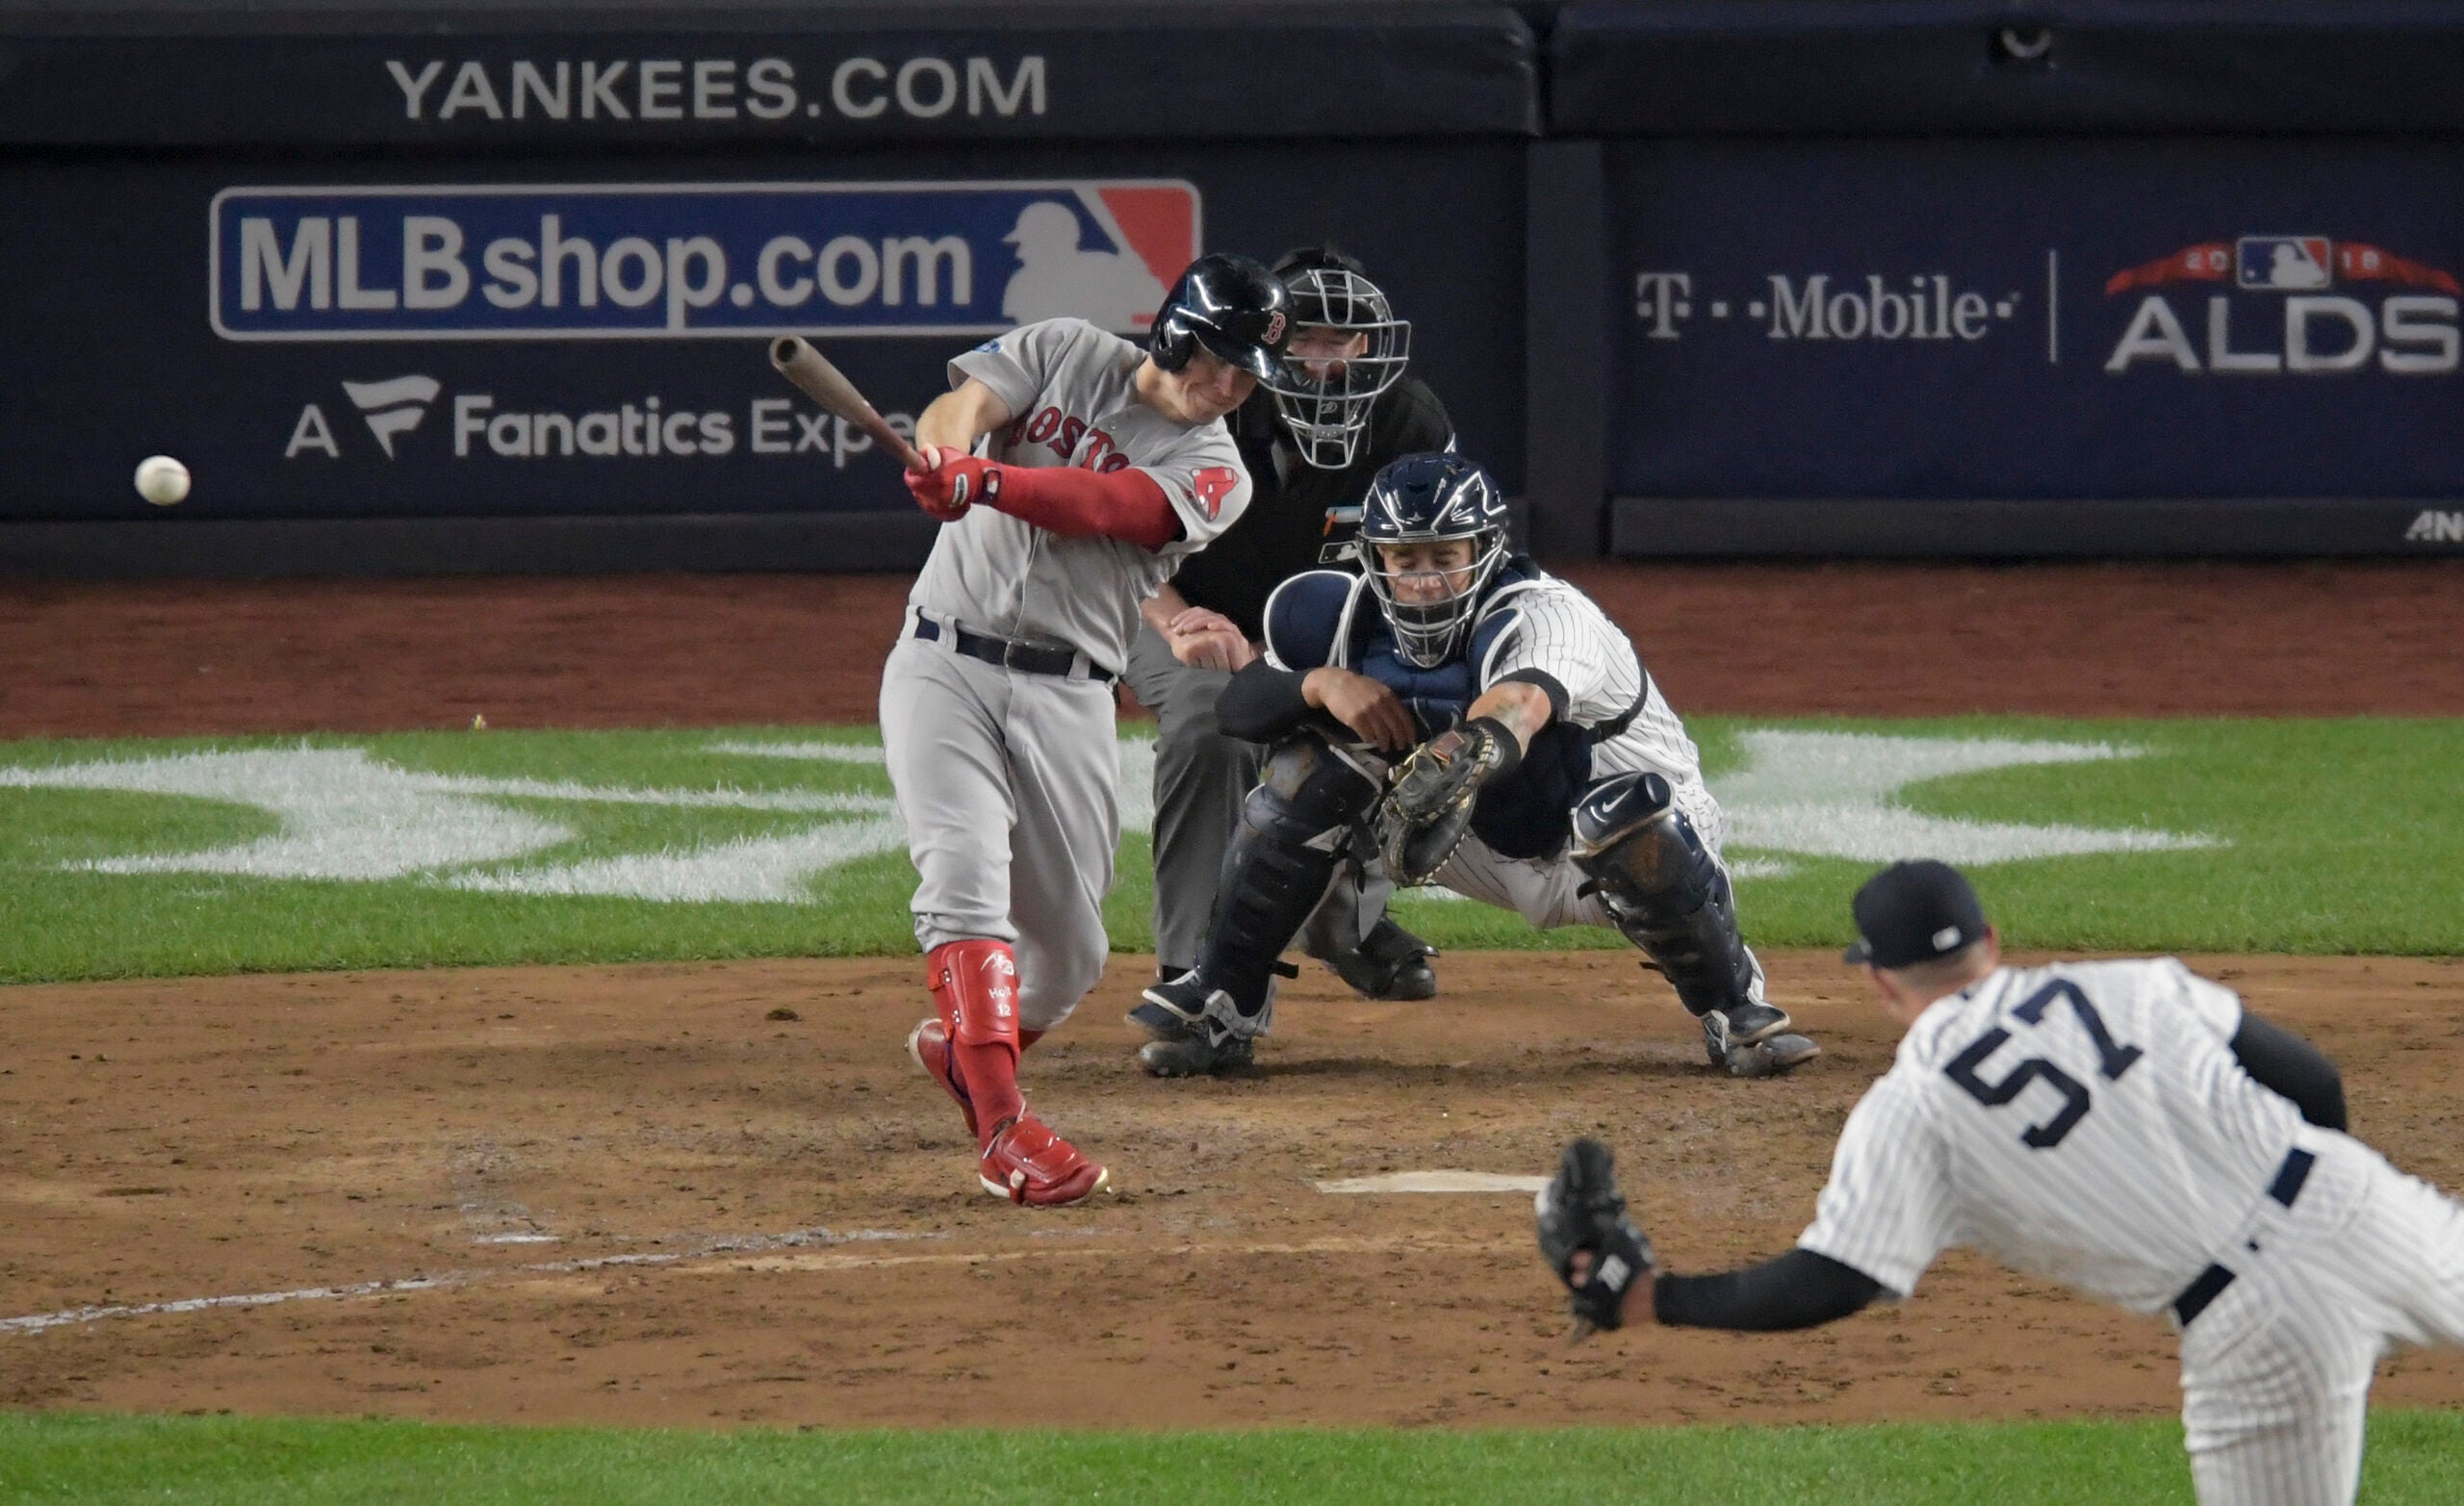 Brock Holt hits the 1st postseason cycle as the Red Sox rout the Yankees  16-1